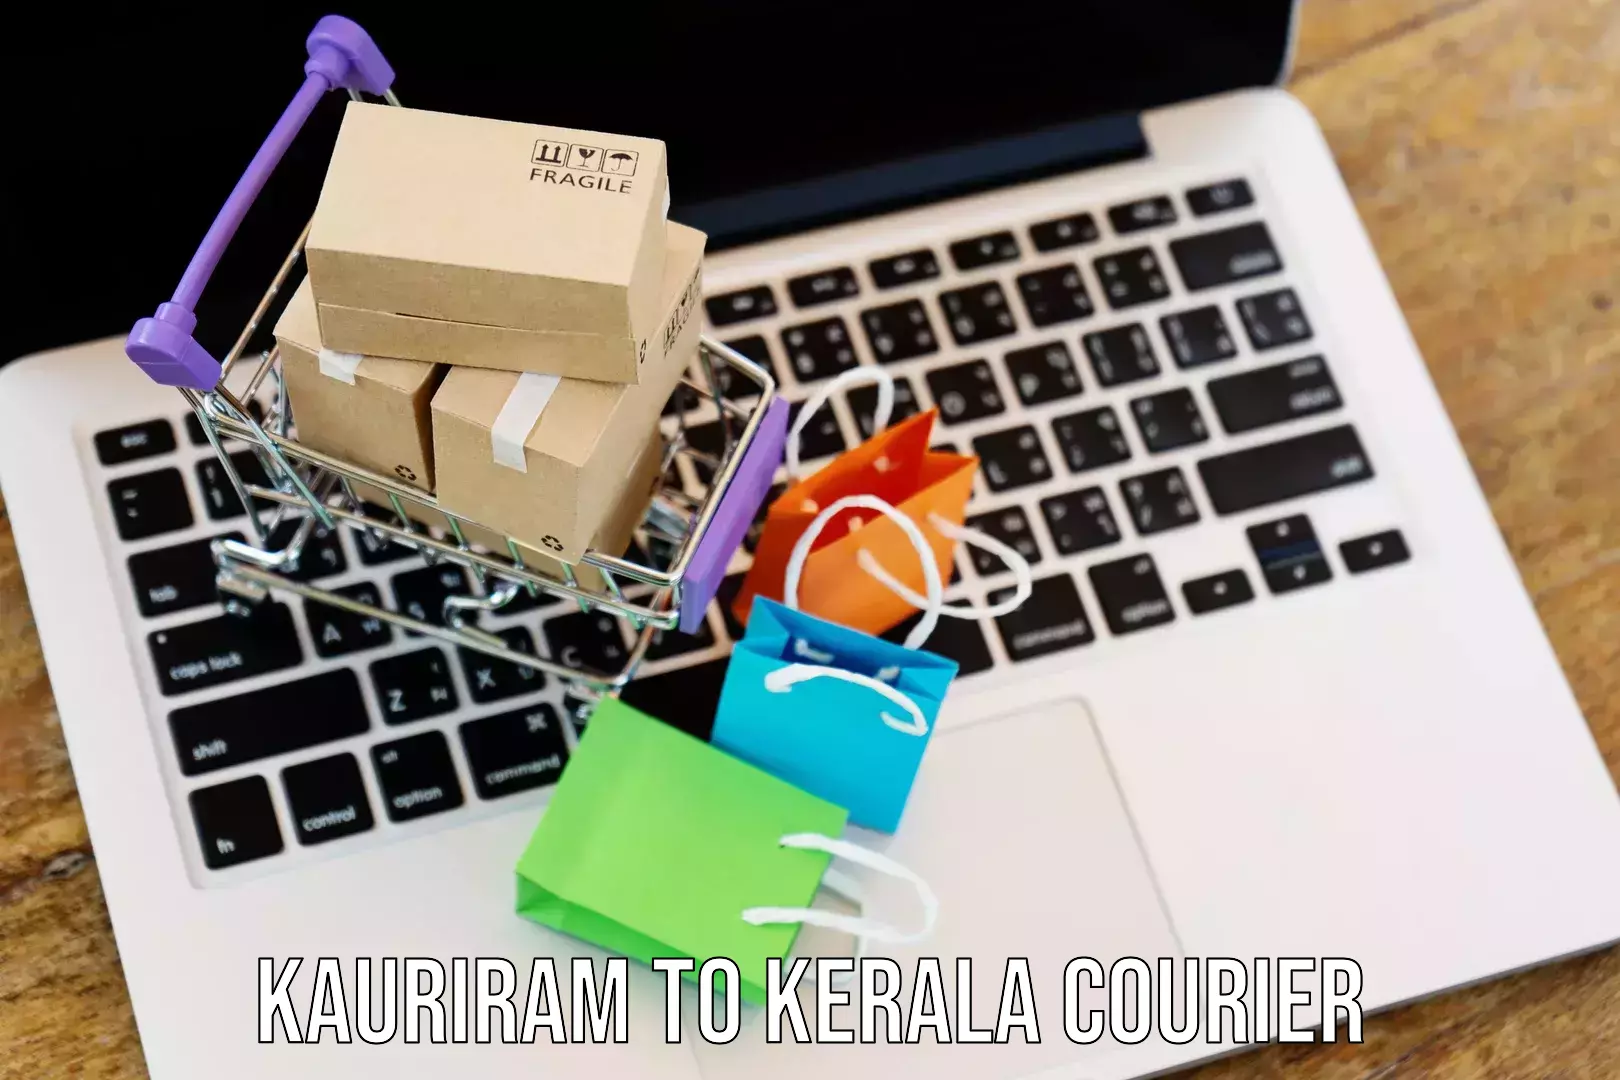 Rural area delivery Kauriram to Kozhikode